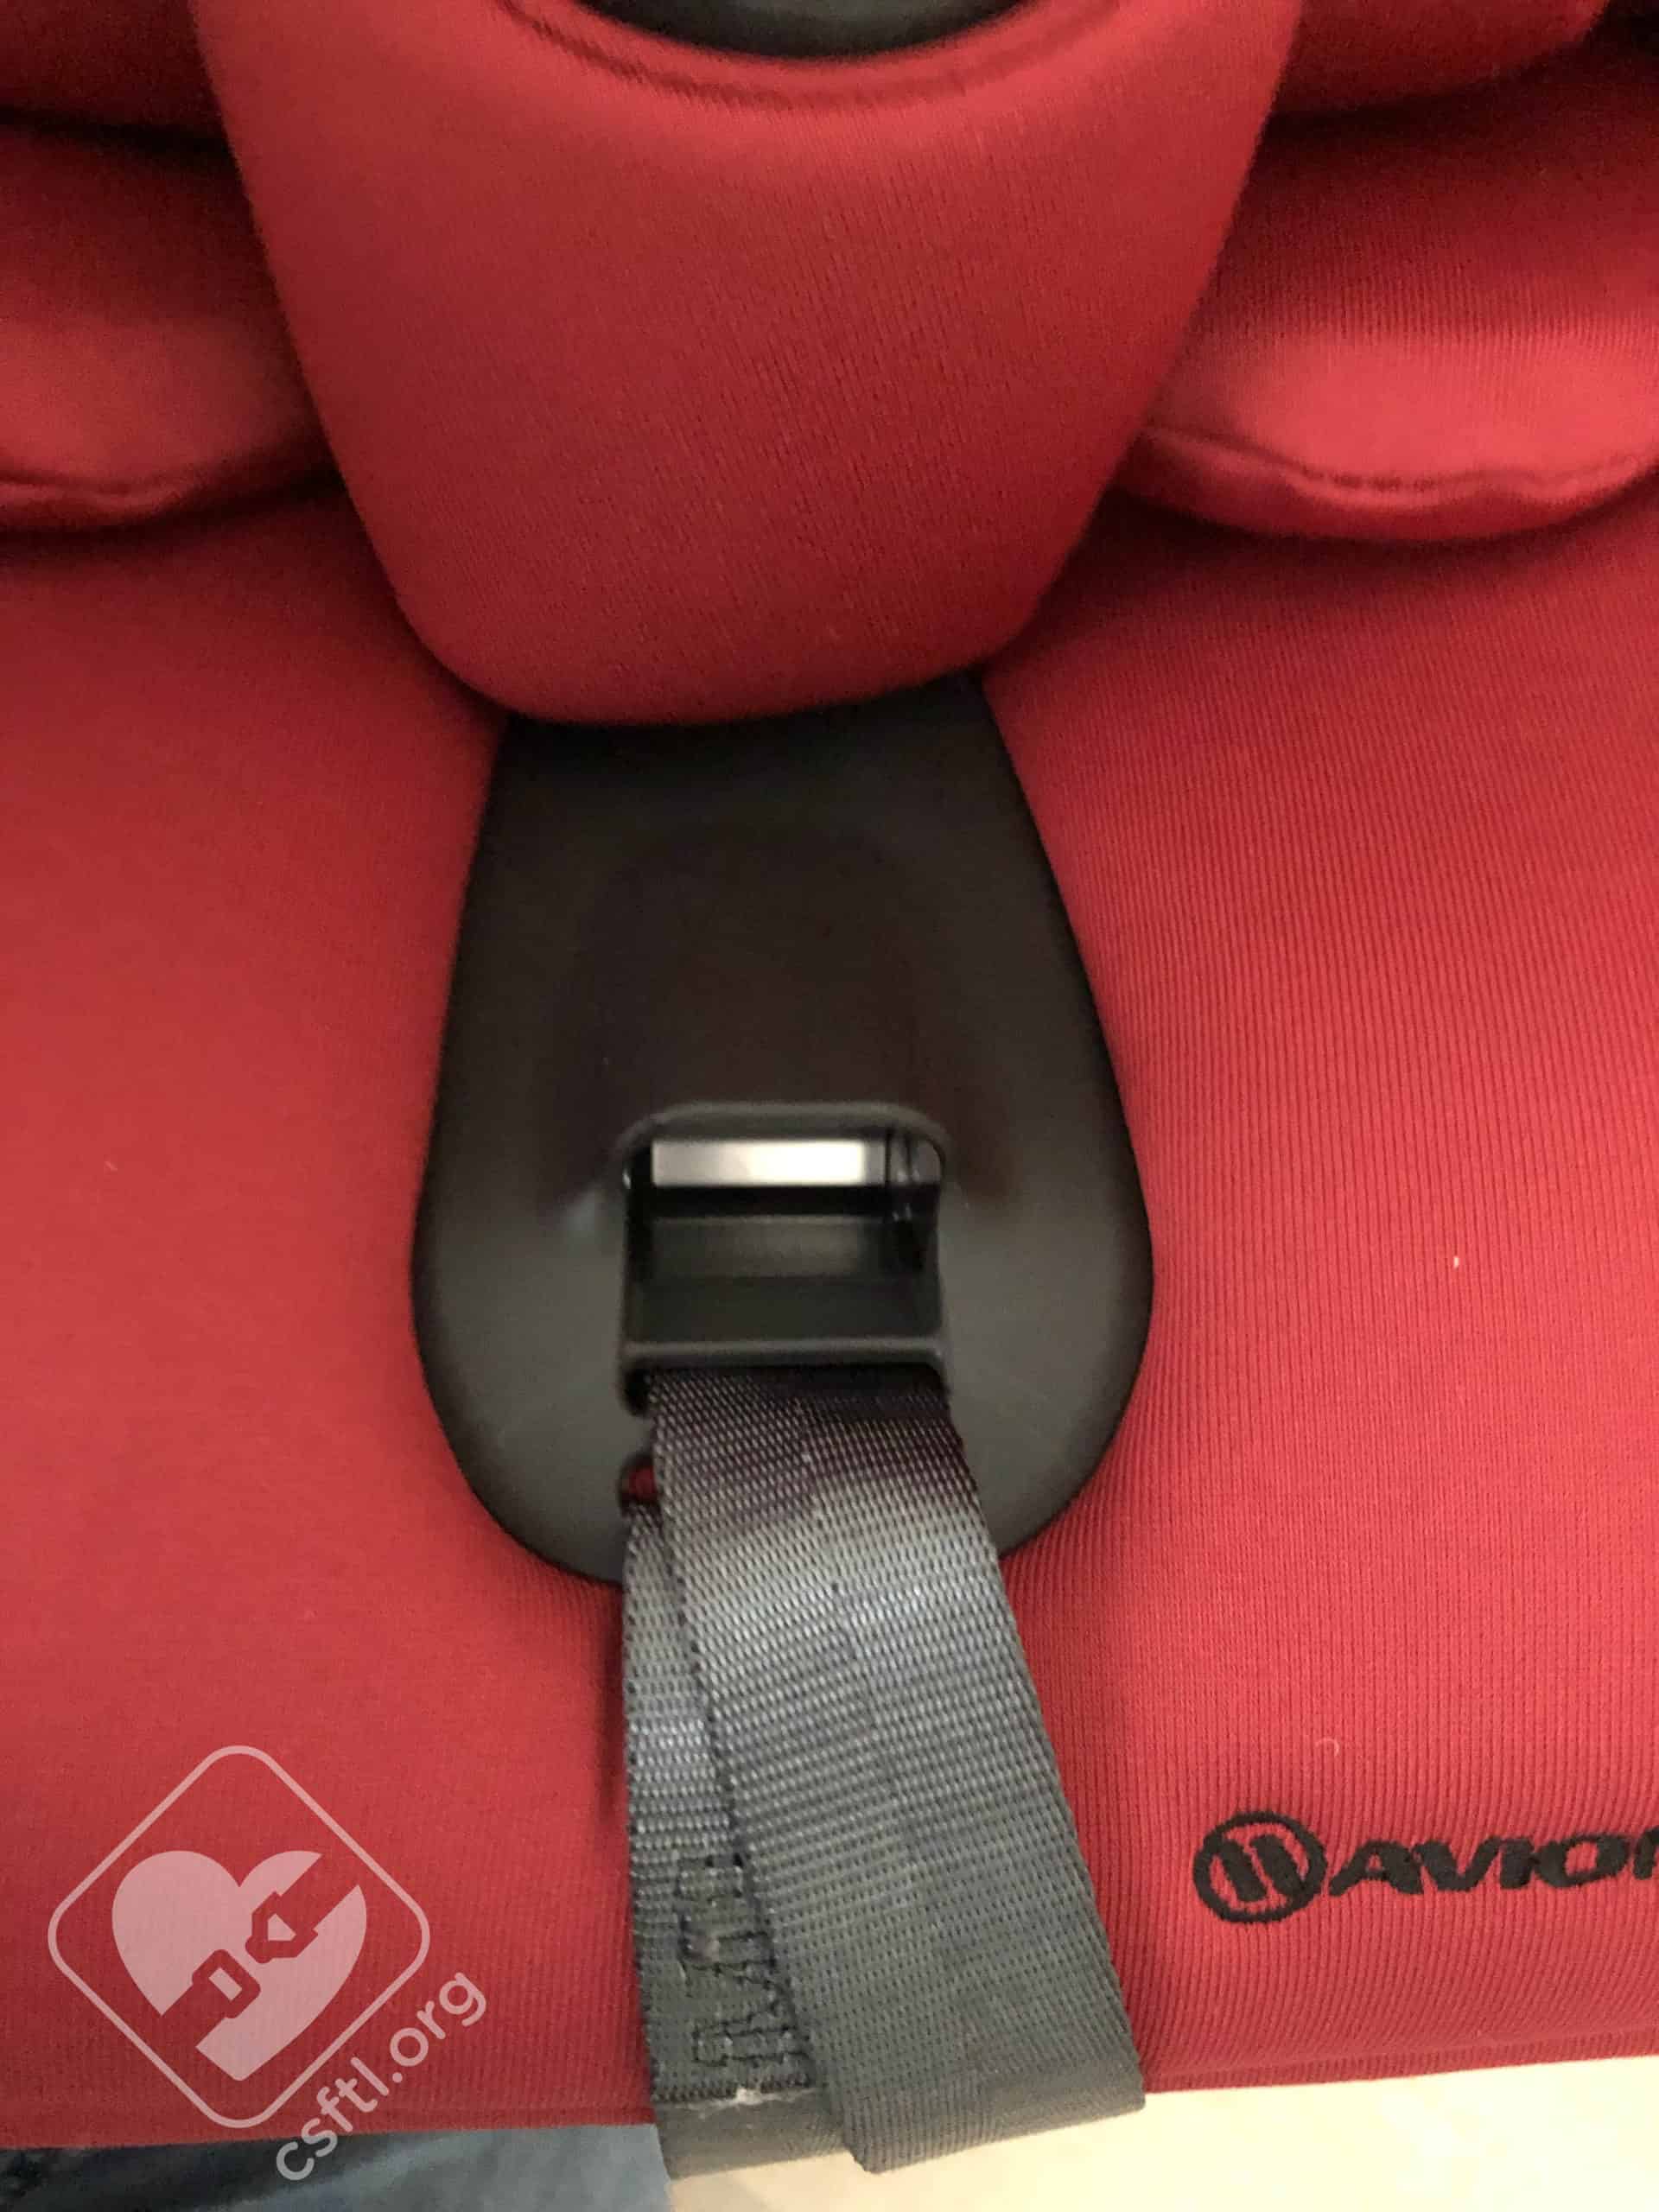 Newborn baby seat – what should I look out for? A midwife's opinion -  Avionaut